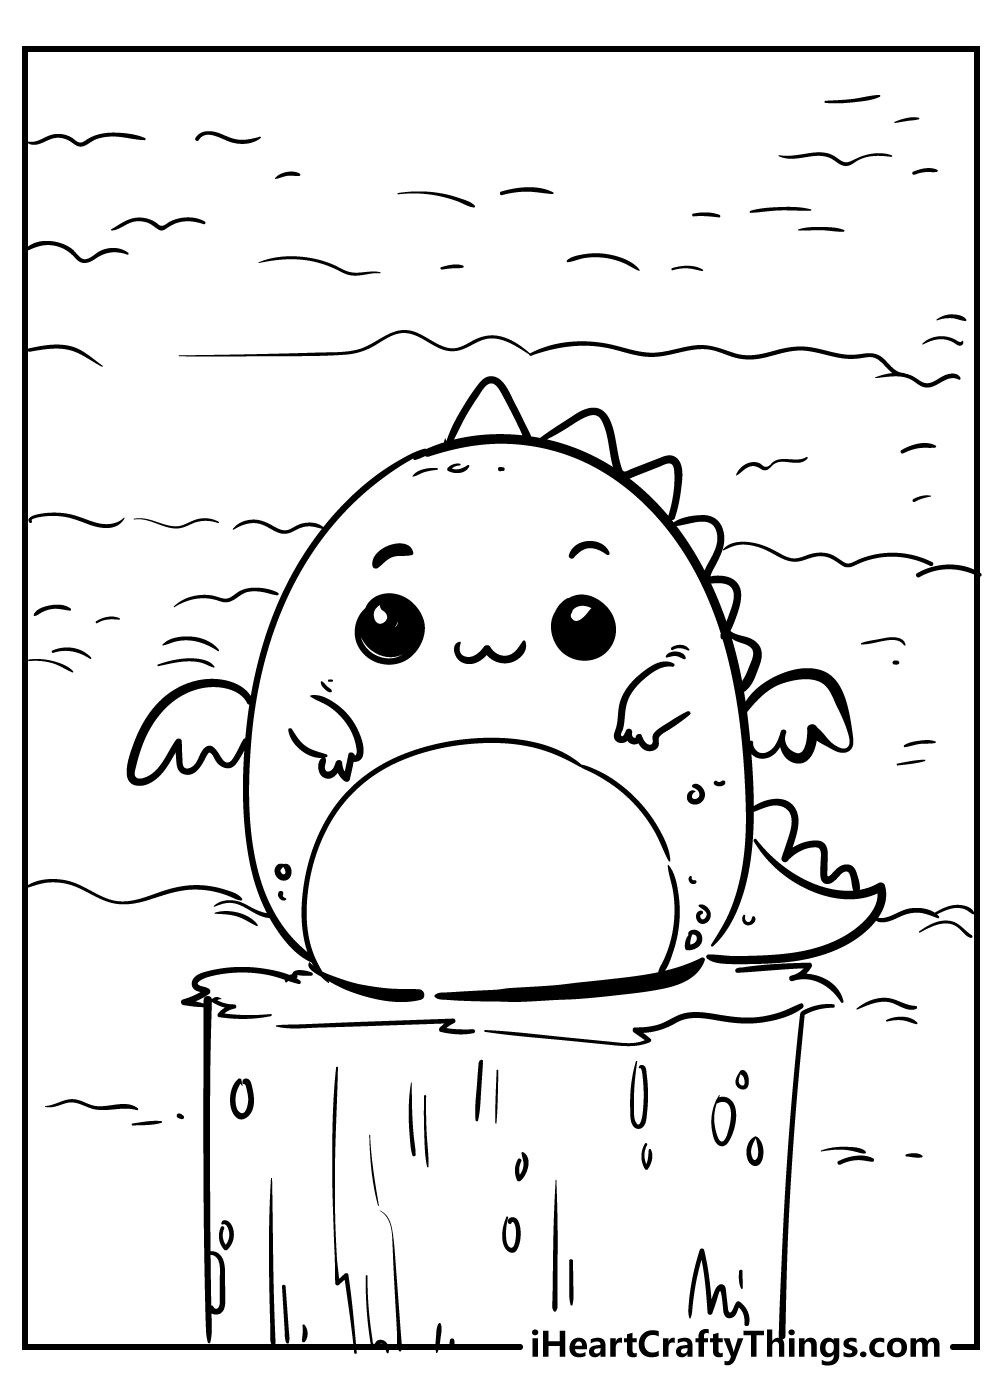 Cute animals coloring pages cute coloring pages stitch coloring pages animal coloring pages